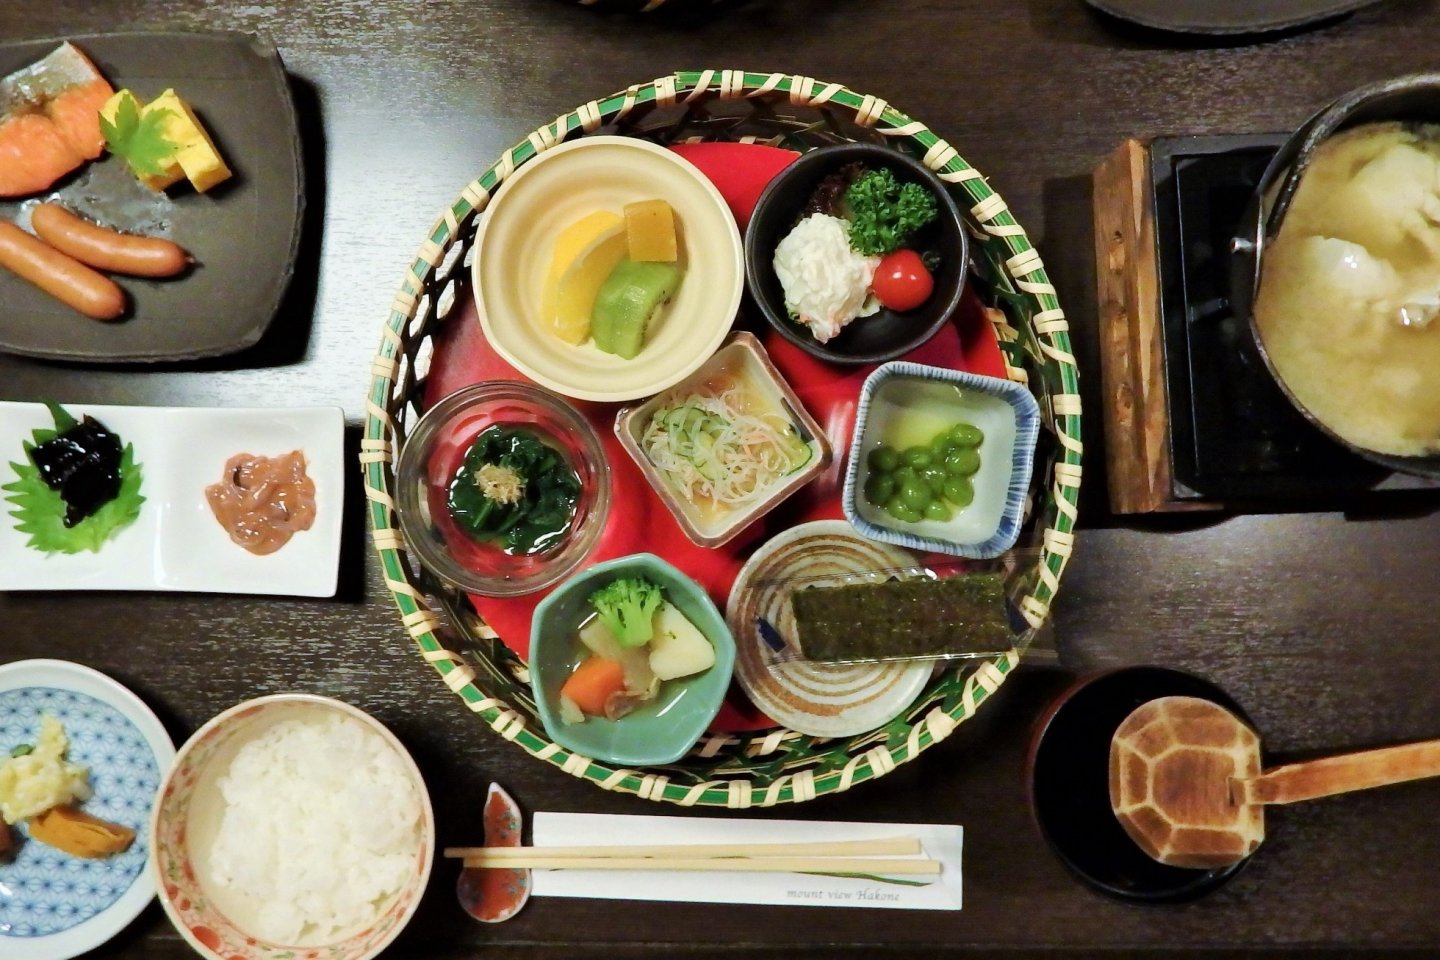 This Japanese breakfast was delicious, dinner was even more so.